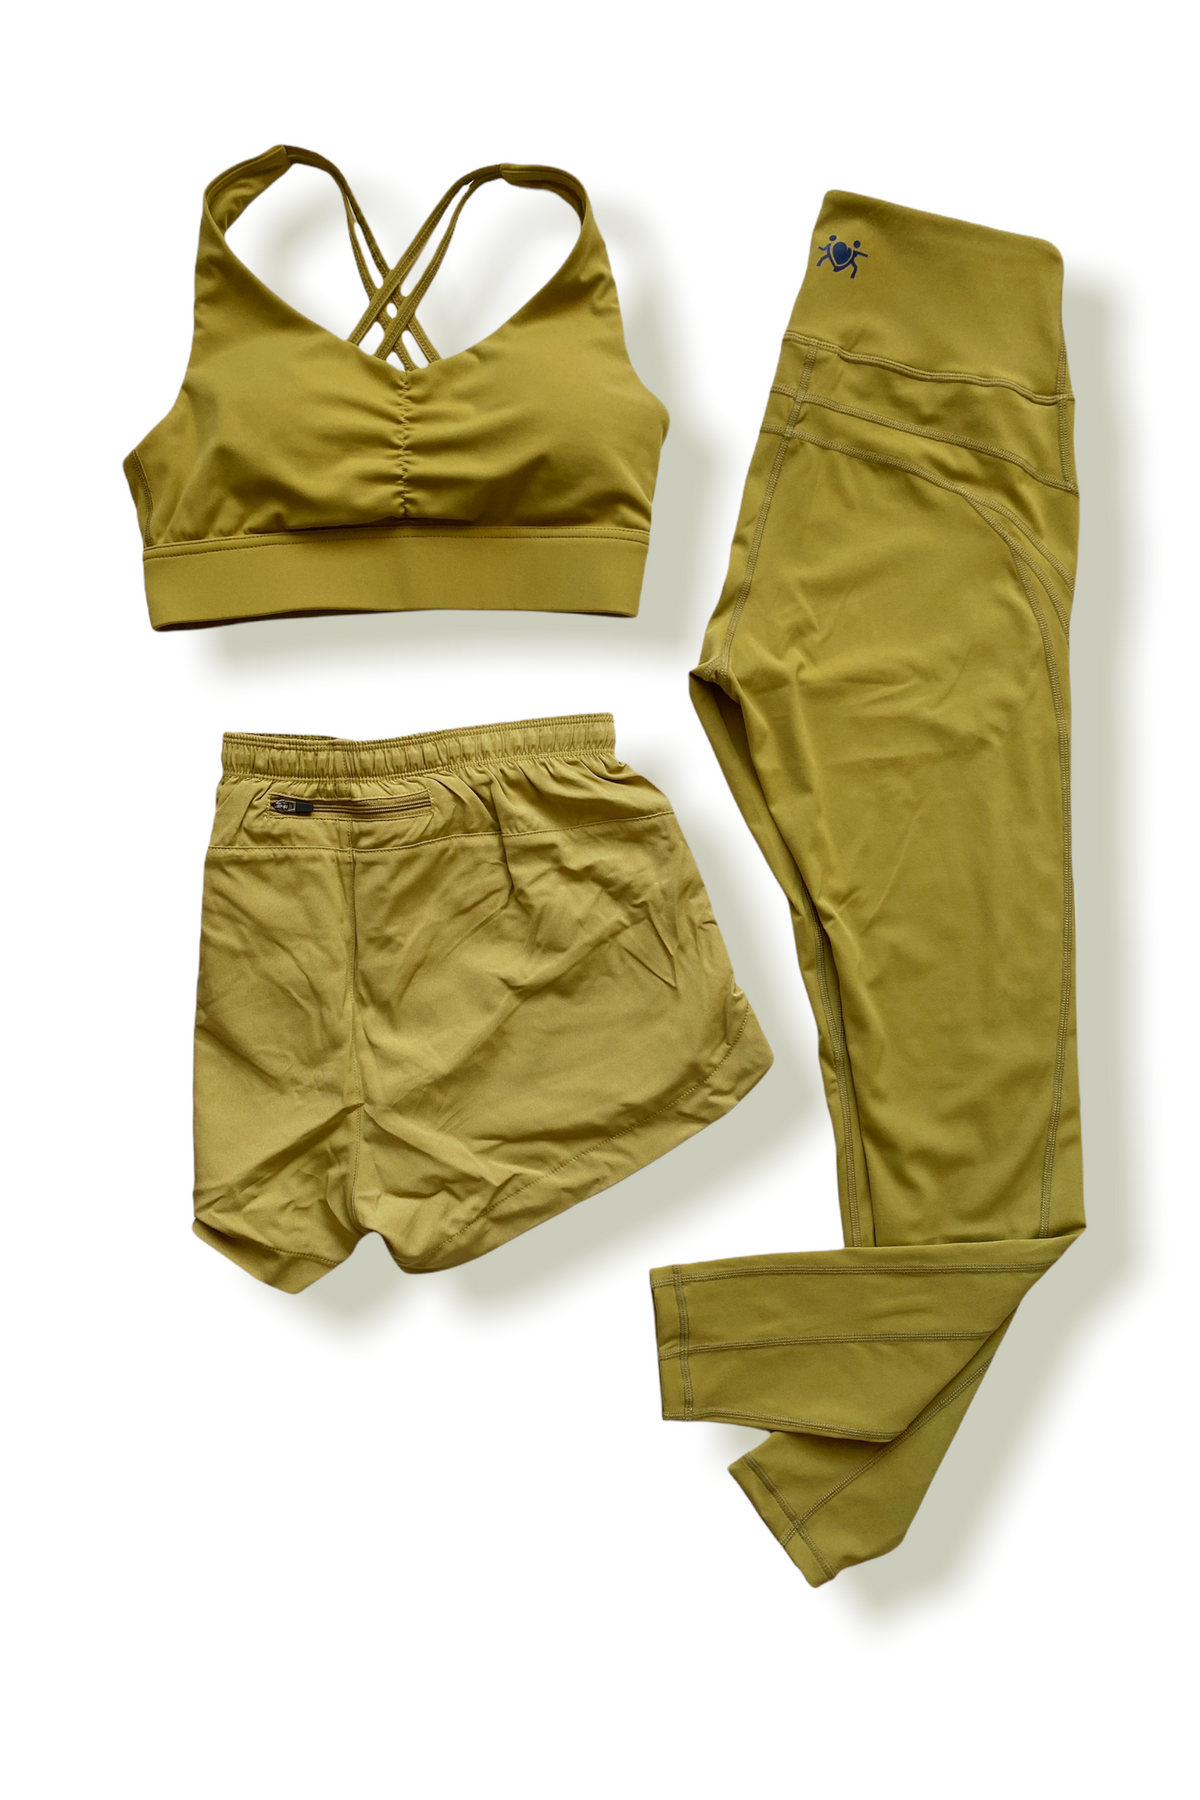 Complete Matcha Kit (with Schenley Run Shorts)